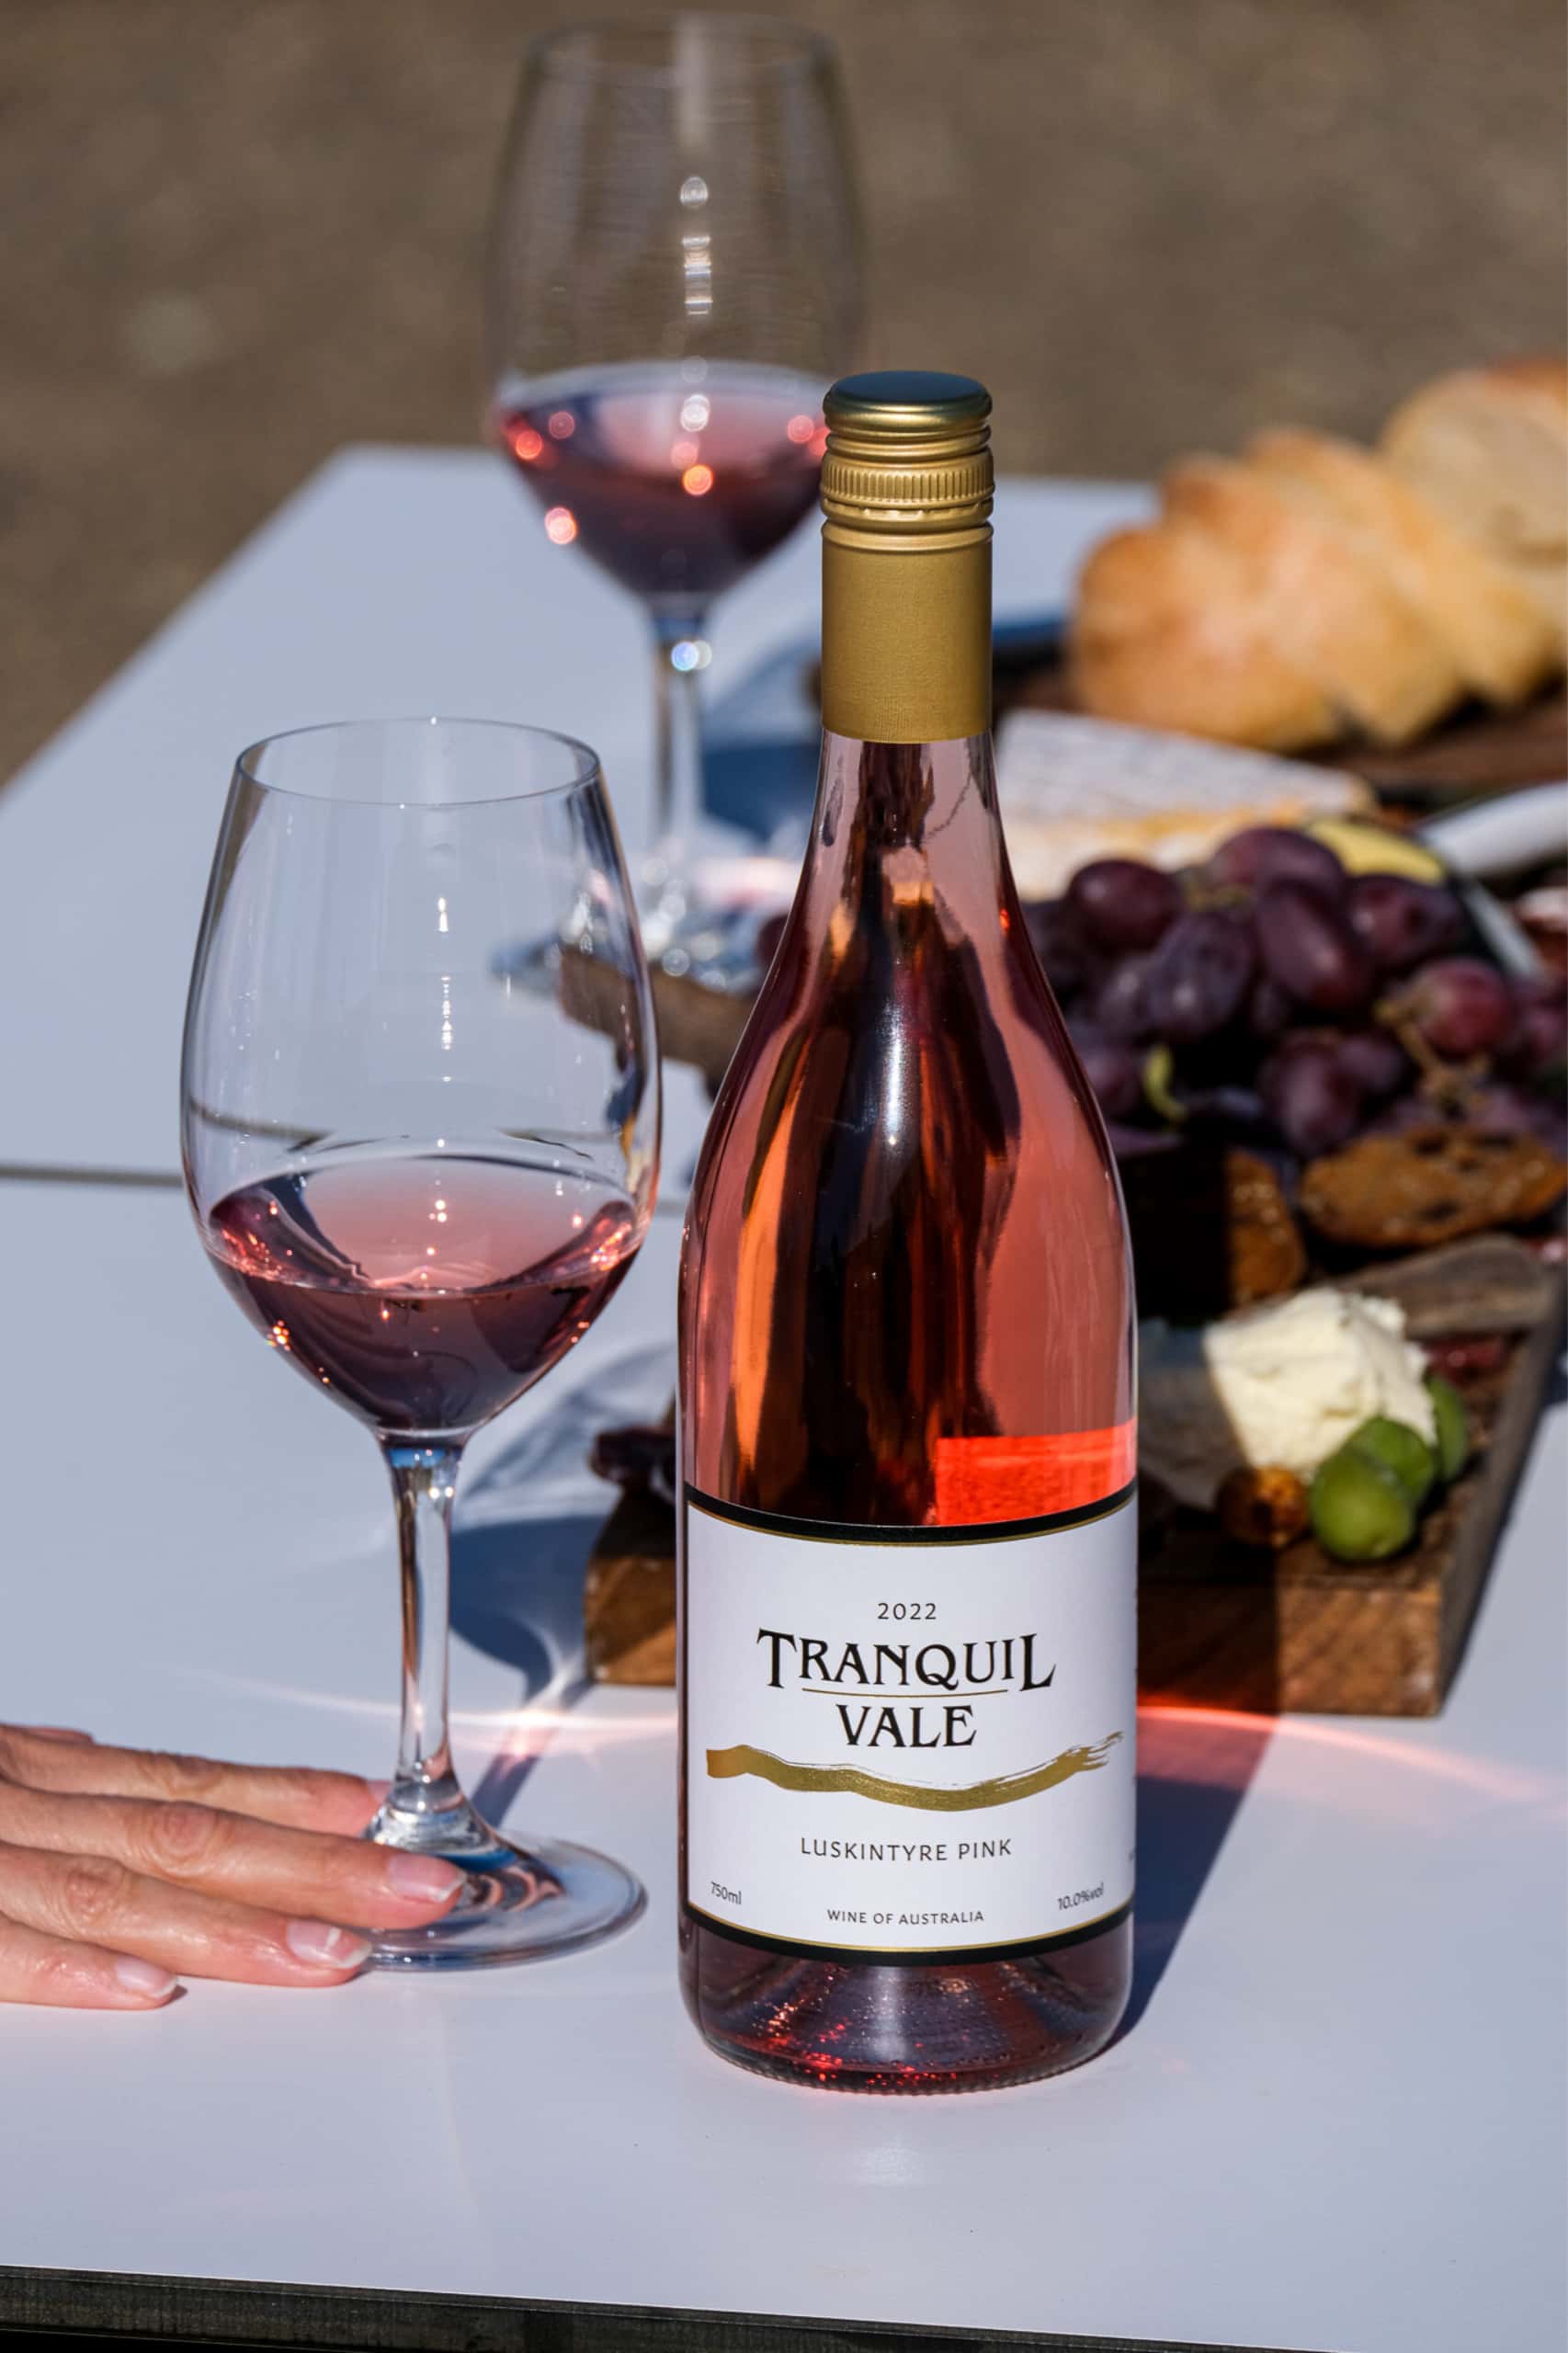 A bottle of Luskintyre Pink wine from Tranquil Vale Vineyard